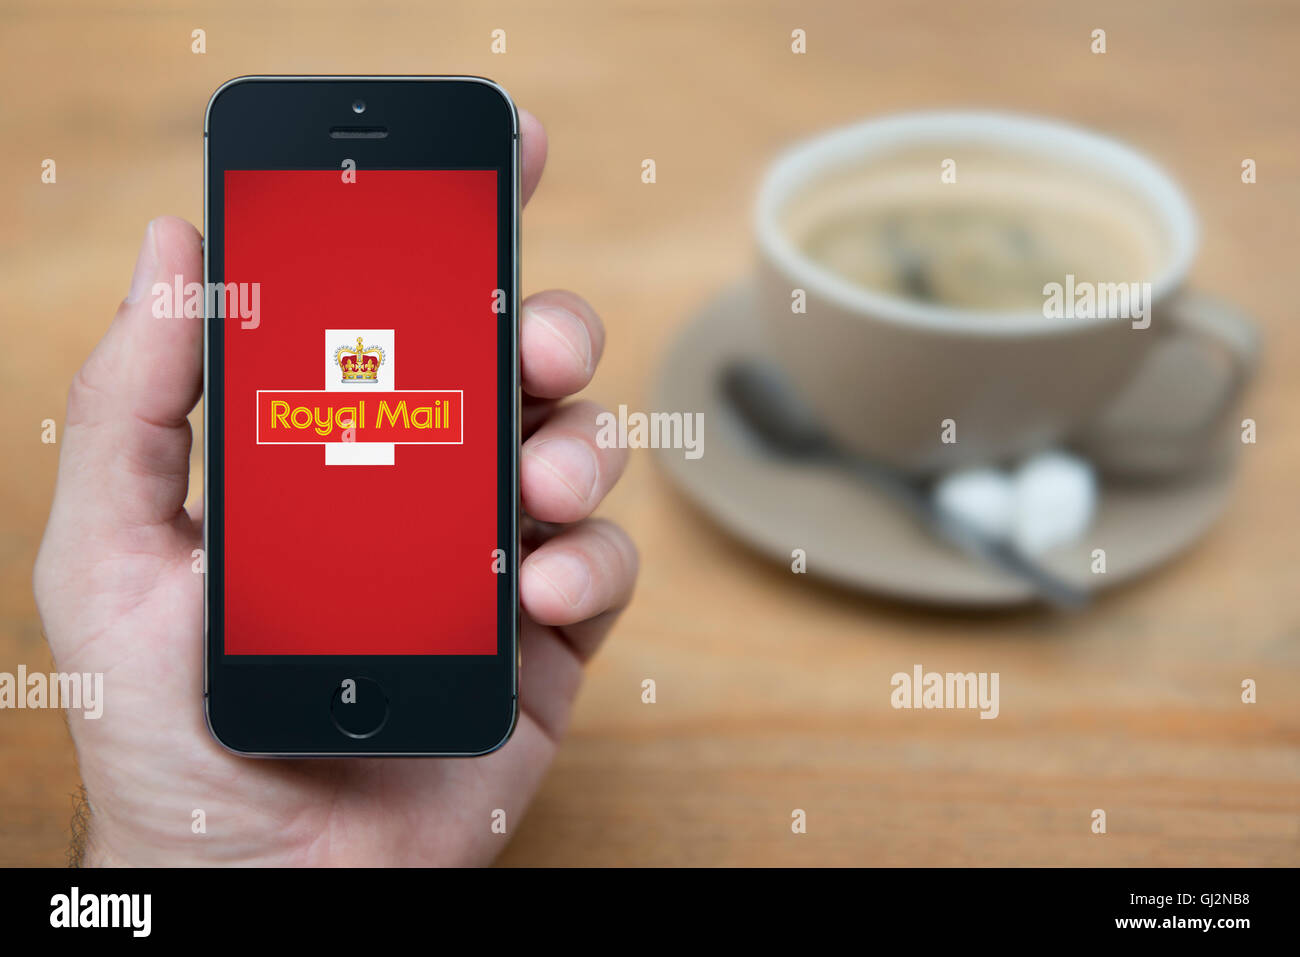 A man looks at his iPhone which displays the Royal Mail logo, while sat with a cup of coffee (Editorial use only). Stock Photo